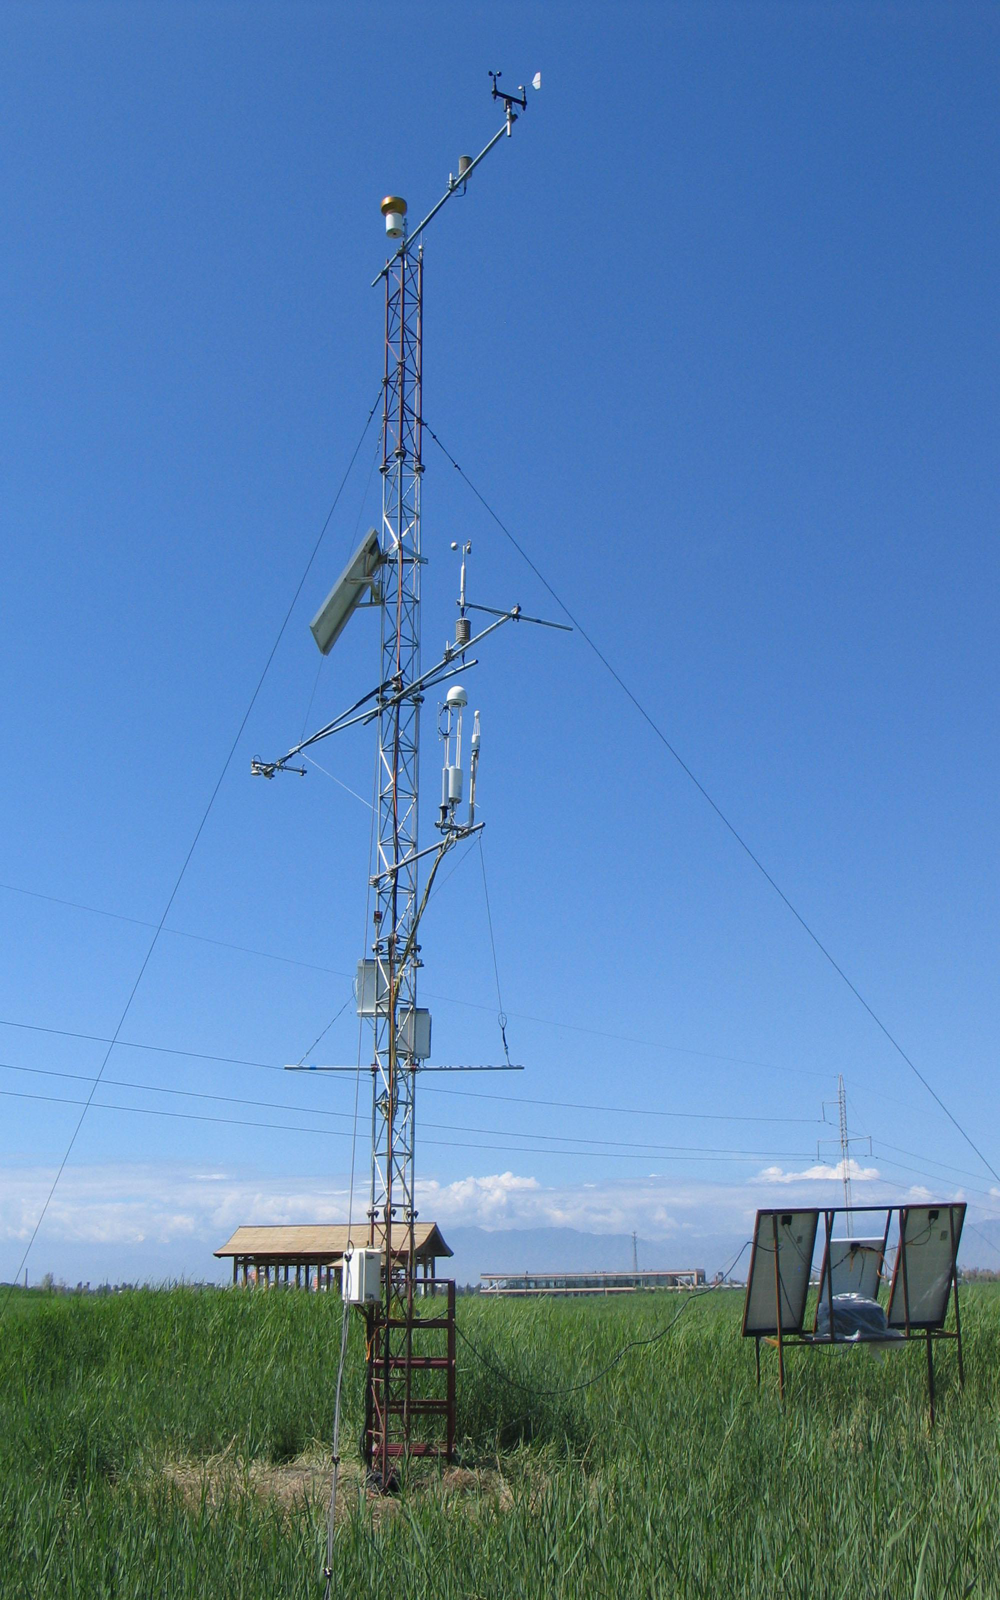 Qilian Mountains integrated observatory network: Dataset of Heihe integrated observatory network (eddy covariance system of Zhangye wetland station, 2021)